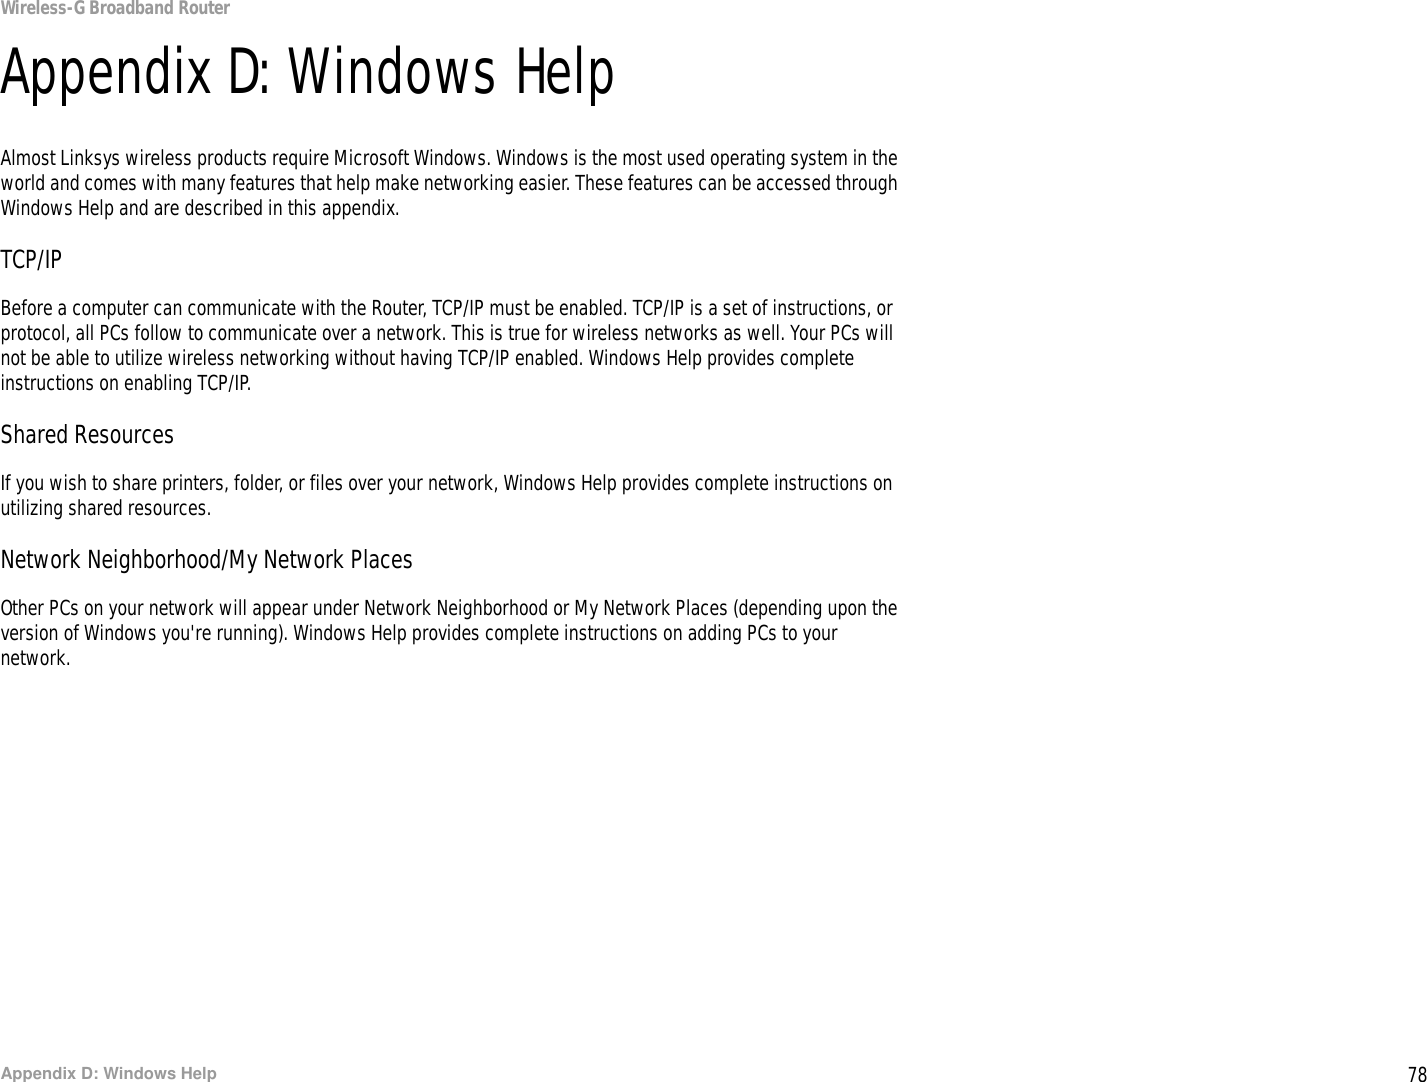 78Appendix D: Windows HelpWireless-G Broadband RouterAppendix D: Windows HelpAlmost Linksys wireless products require Microsoft Windows. Windows is the most used operating system in the world and comes with many features that help make networking easier. These features can be accessed through Windows Help and are described in this appendix.TCP/IPBefore a computer can communicate with the Router, TCP/IP must be enabled. TCP/IP is a set of instructions, or protocol, all PCs follow to communicate over a network. This is true for wireless networks as well. Your PCs will not be able to utilize wireless networking without having TCP/IP enabled. Windows Help provides complete instructions on enabling TCP/IP.Shared ResourcesIf you wish to share printers, folder, or files over your network, Windows Help provides complete instructions on utilizing shared resources.Network Neighborhood/My Network PlacesOther PCs on your network will appear under Network Neighborhood or My Network Places (depending upon the version of Windows you&apos;re running). Windows Help provides complete instructions on adding PCs to your network.